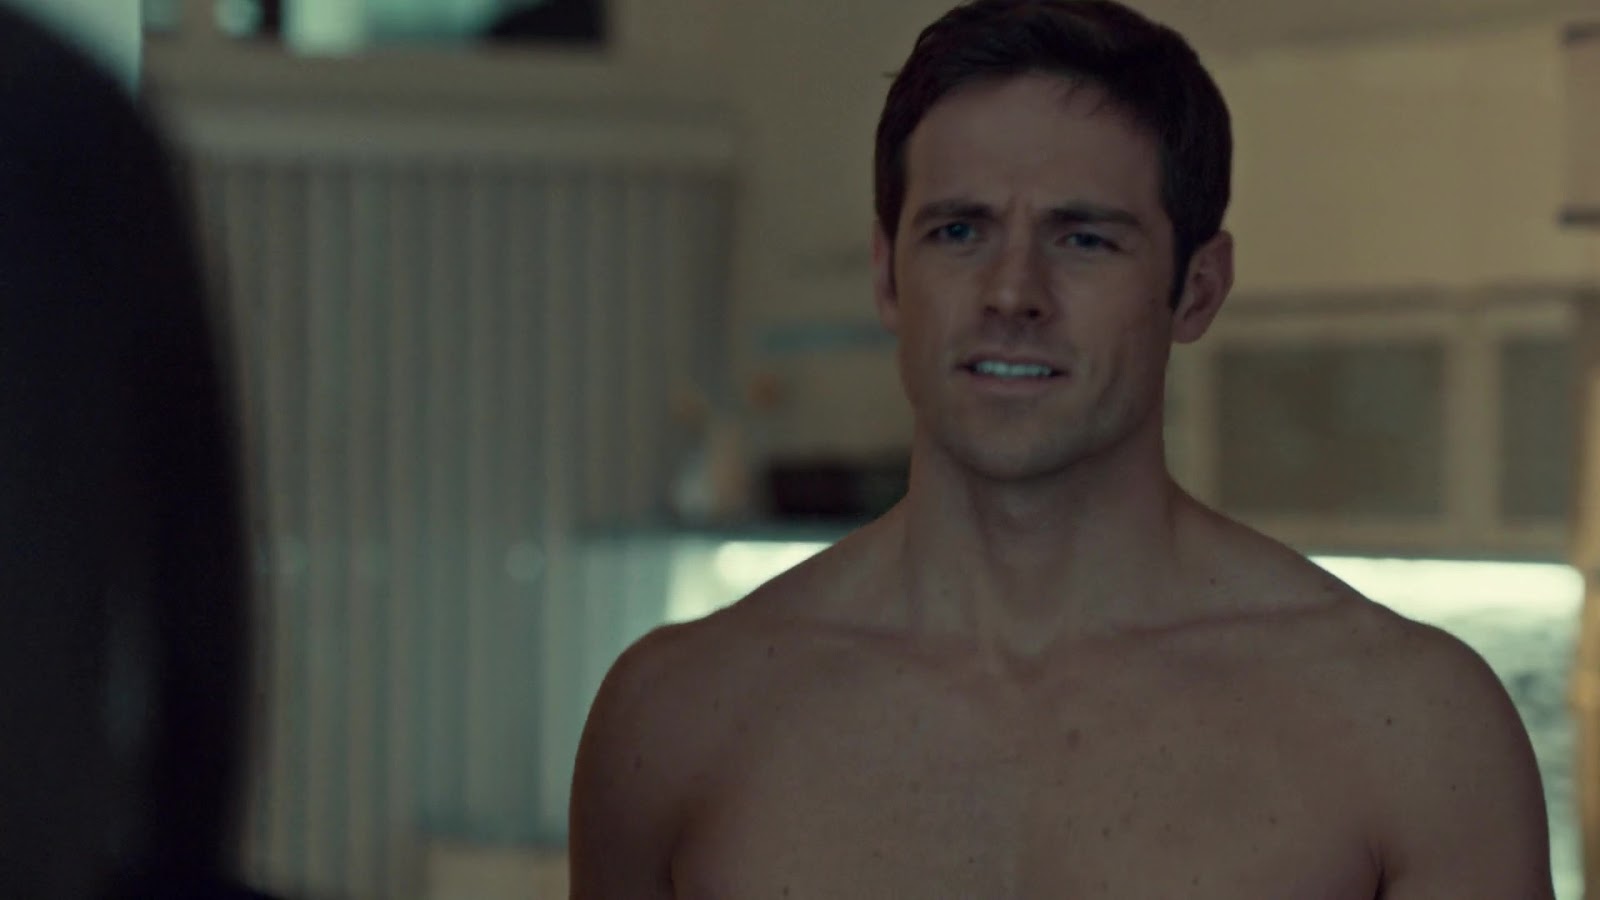 Dylan Bruce nude in Orphan Black 1-01 "Natural Selection" .